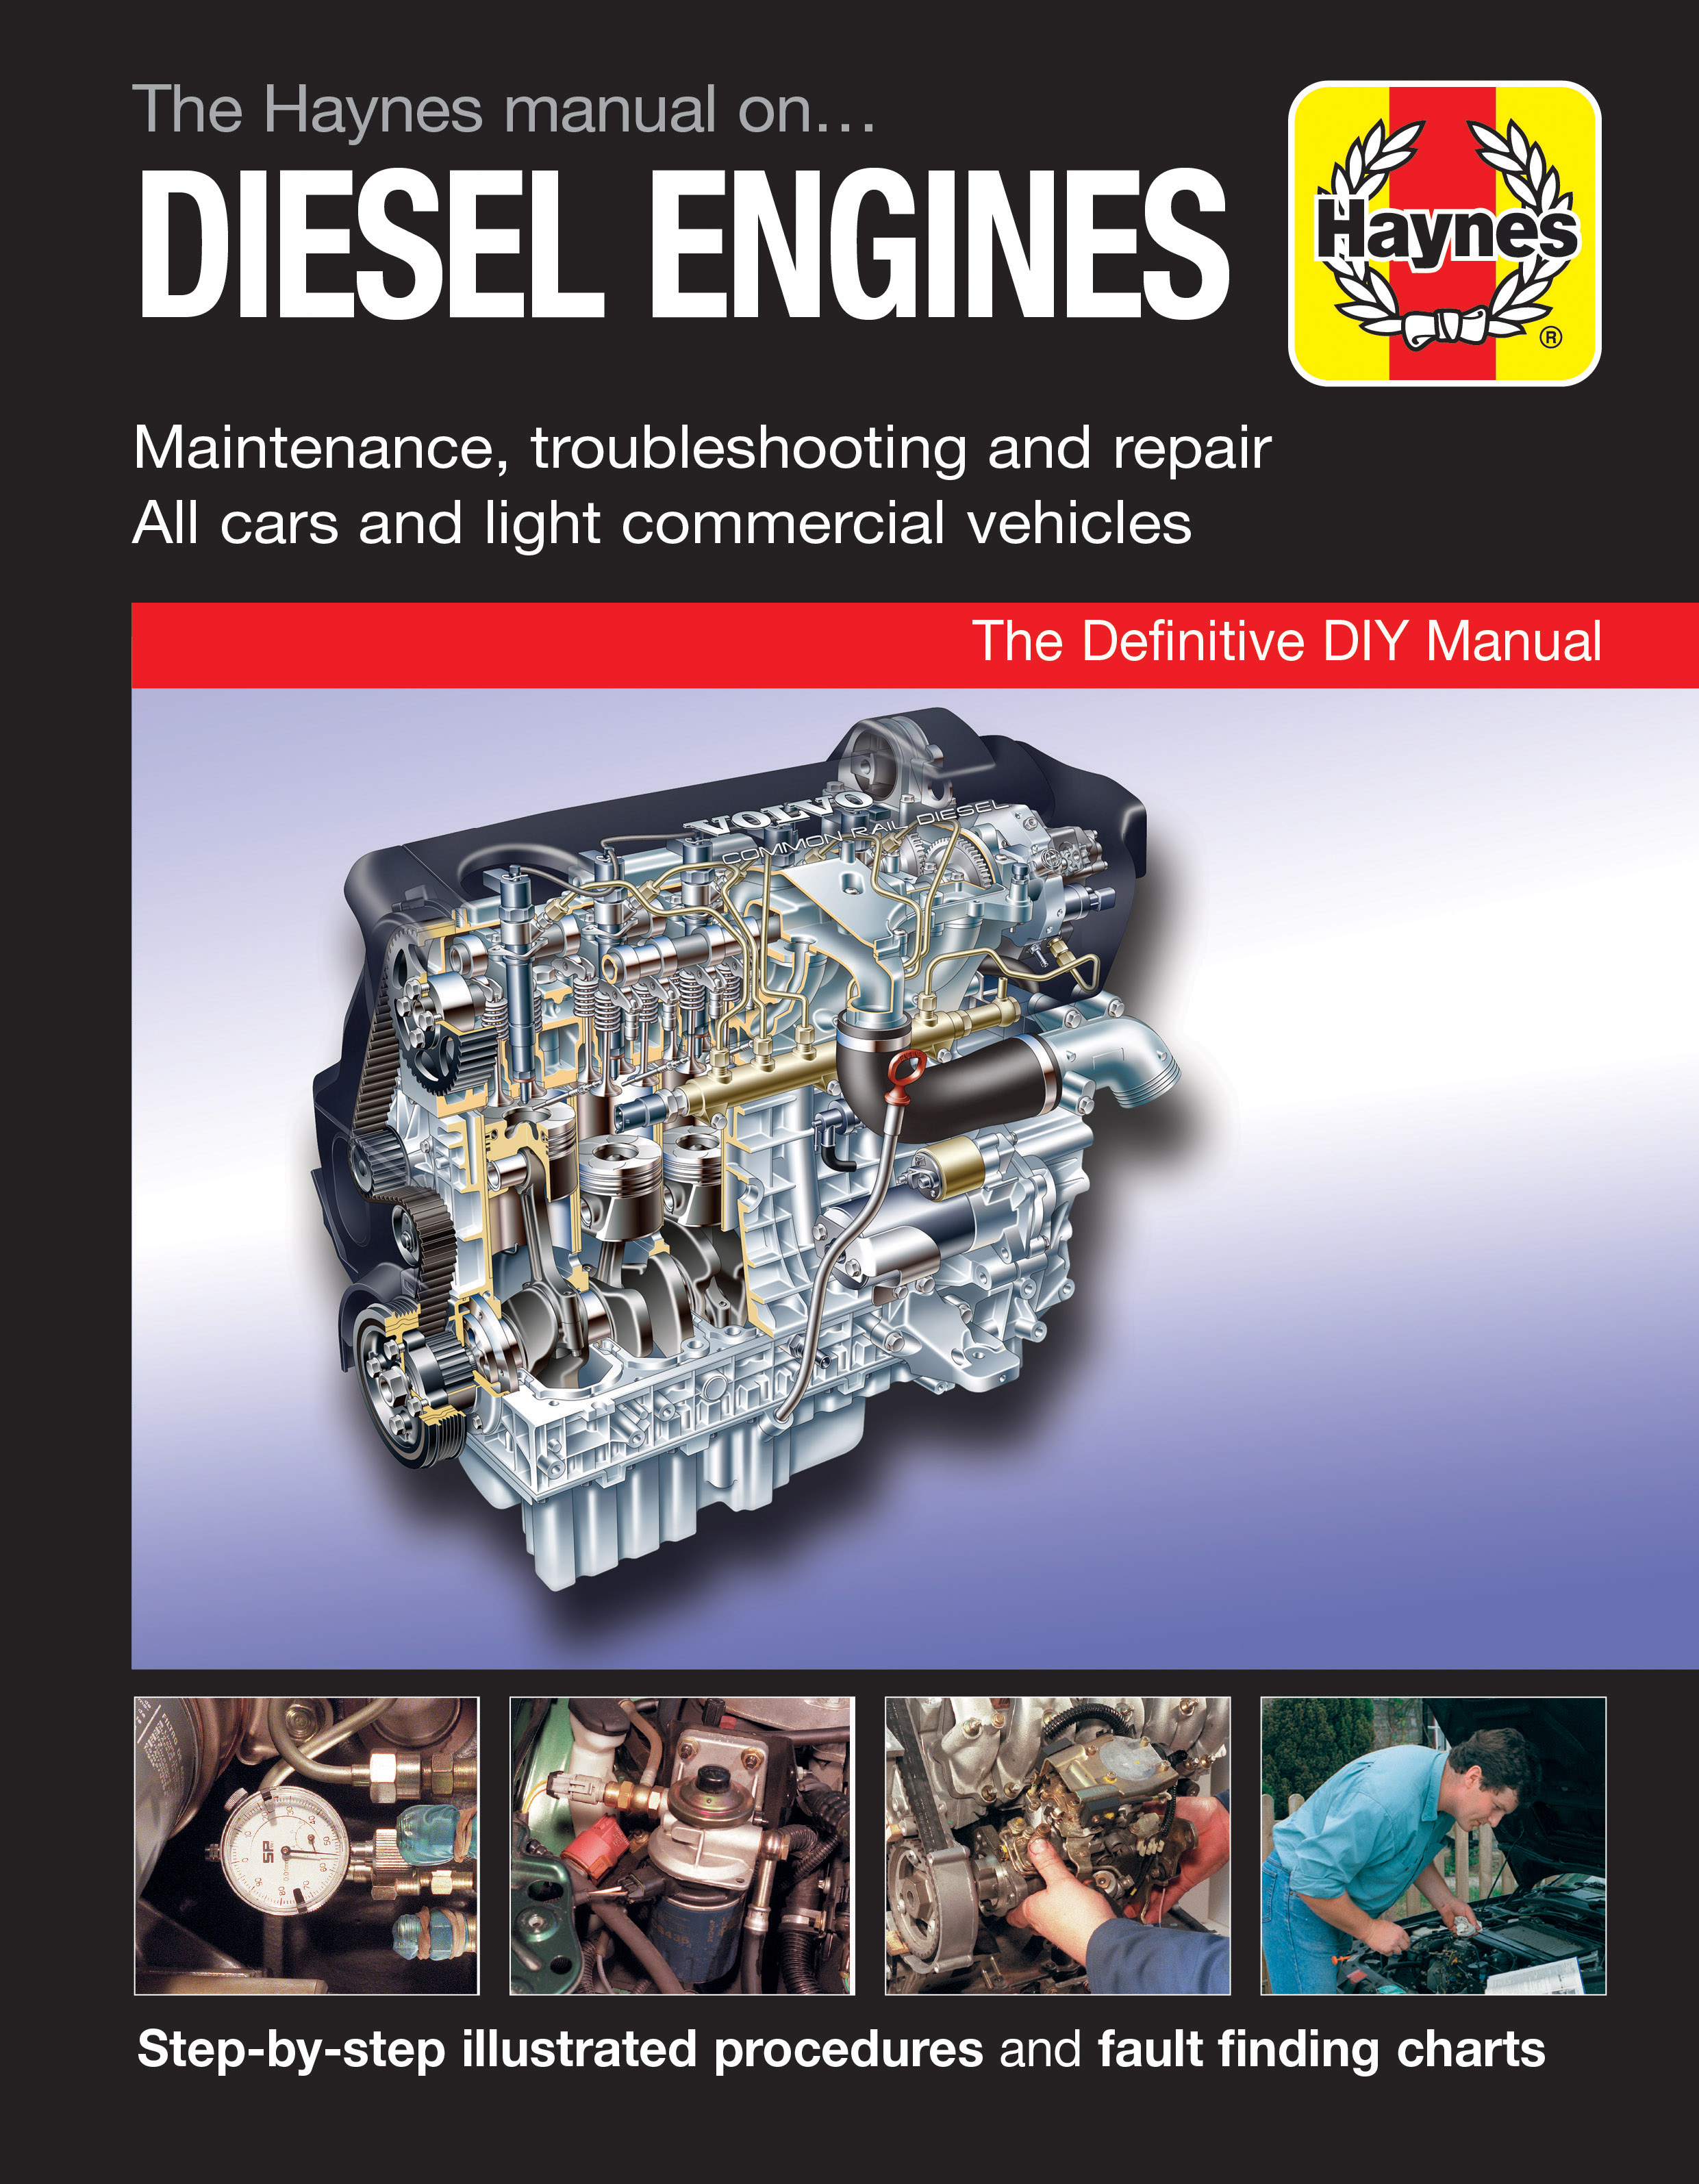 Covers Injection Systems The Haynes Manual on Diesel Engines 